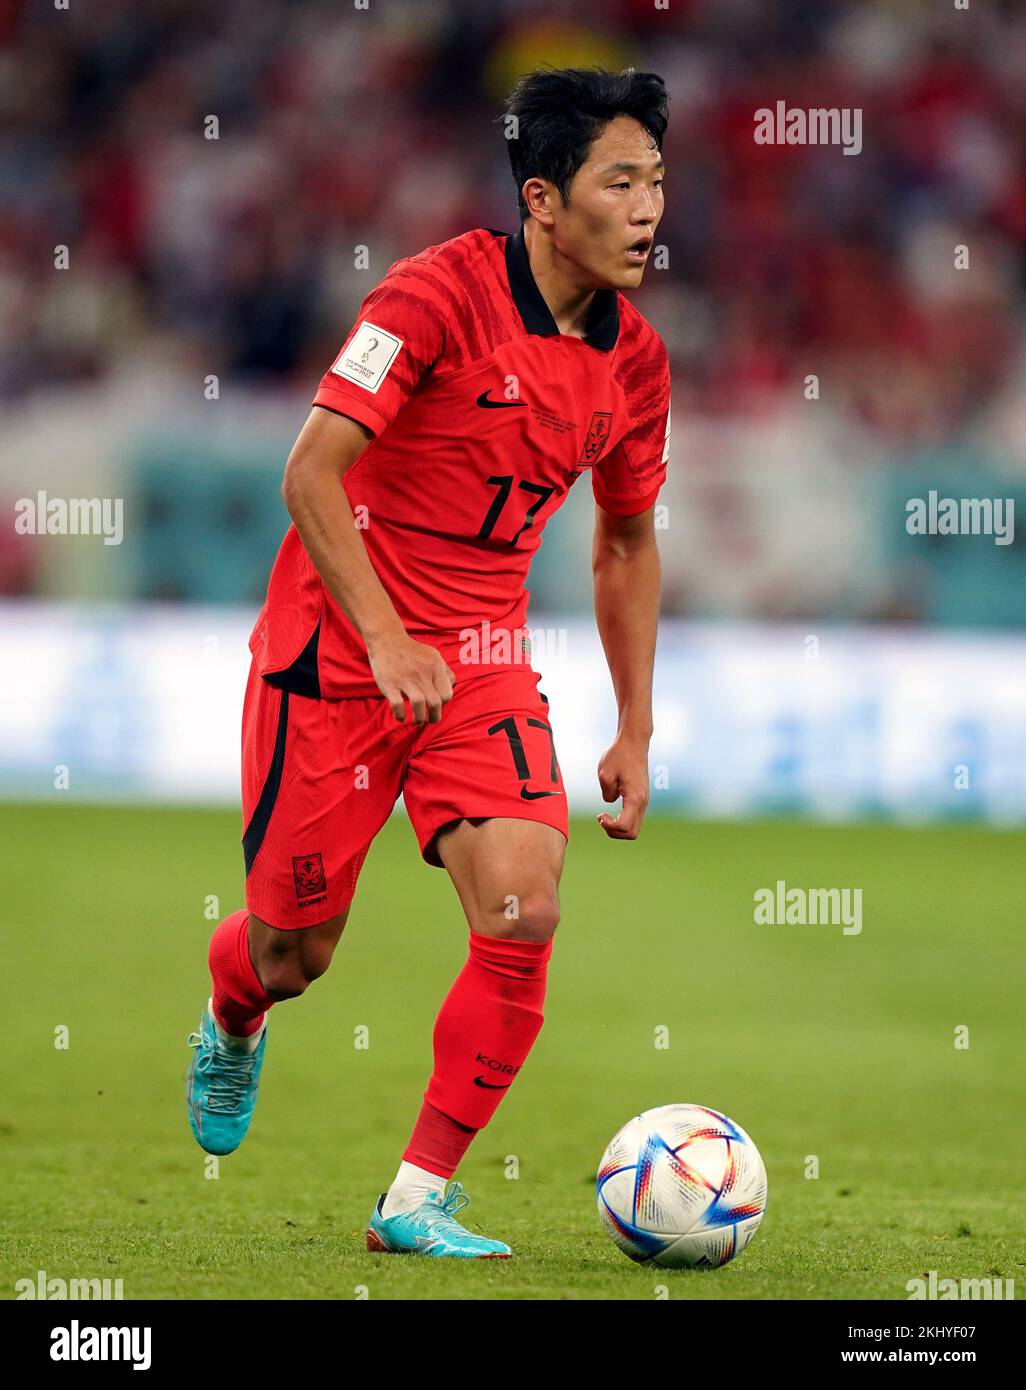 South Korea's Na Sang-ho during the FIFA World Cup Group H match at the Education City Stadium, Doha, Qatar. Picture date: Thursday November 24, 2022. Stock Photo